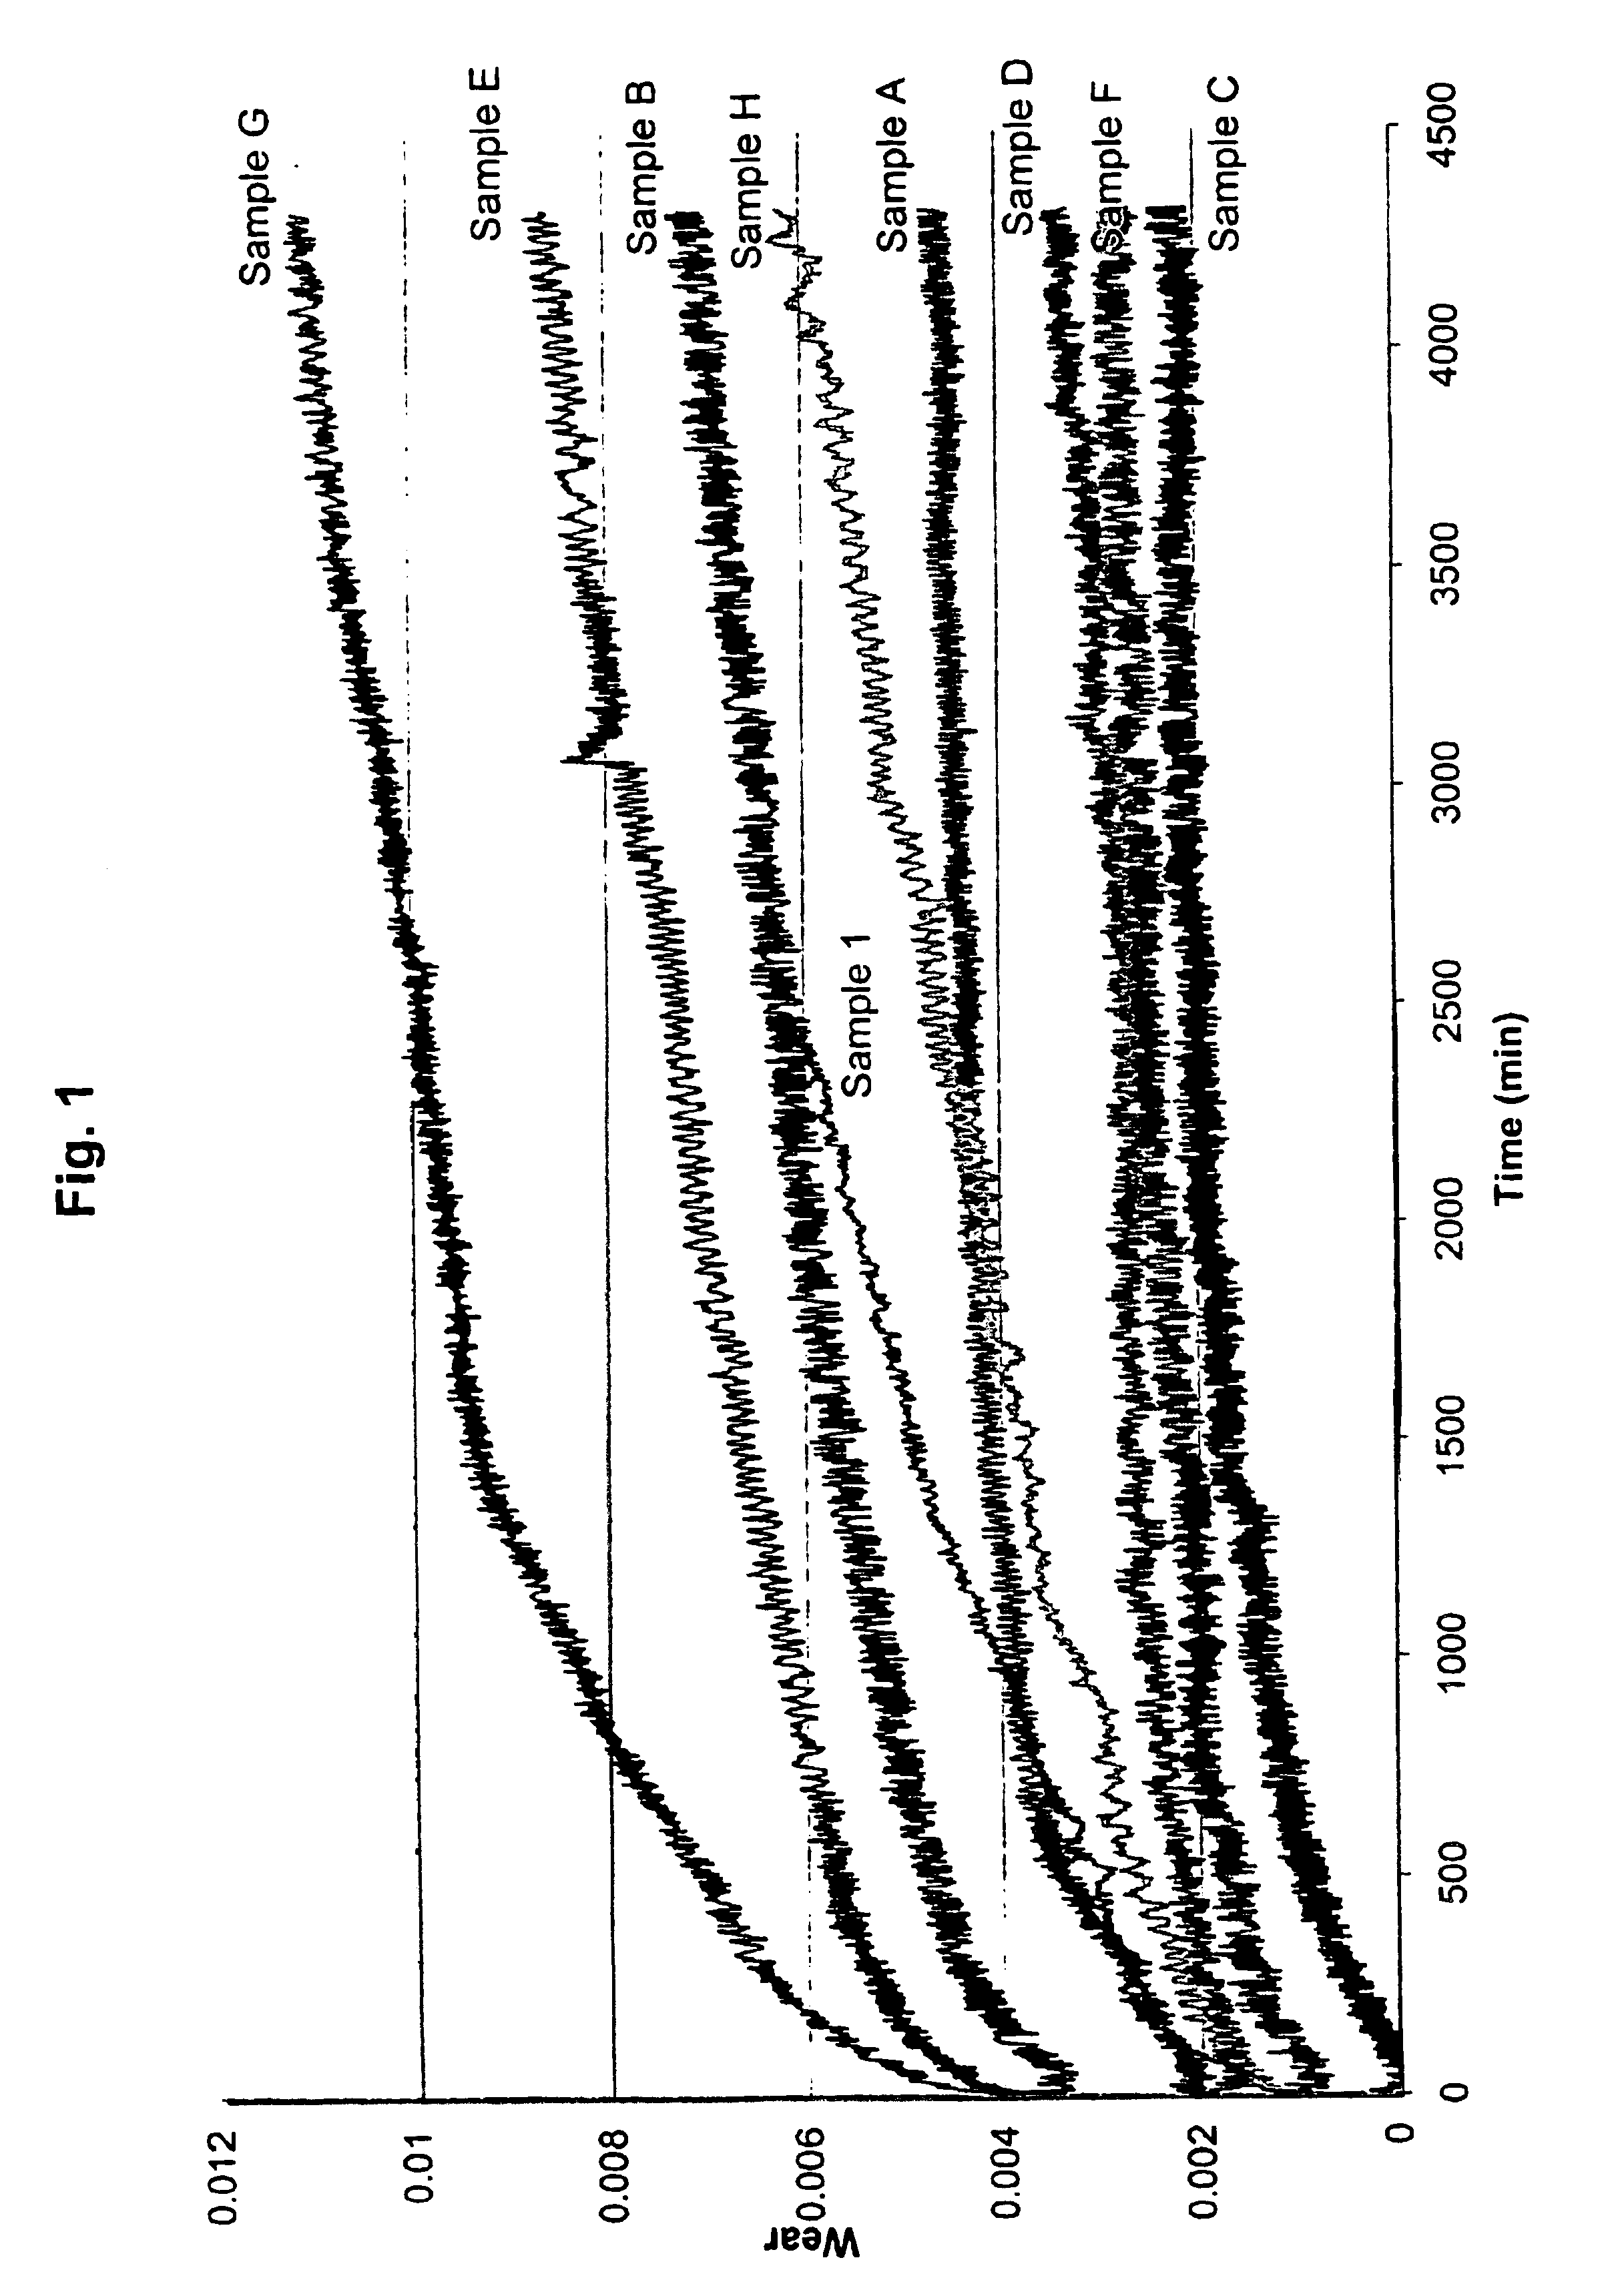 Compositions containing polyphenylene ether and/or polystyrene having improved tribological properties and methods for improving tribological properties of polyphenylene ether and/or polystyrene compositions